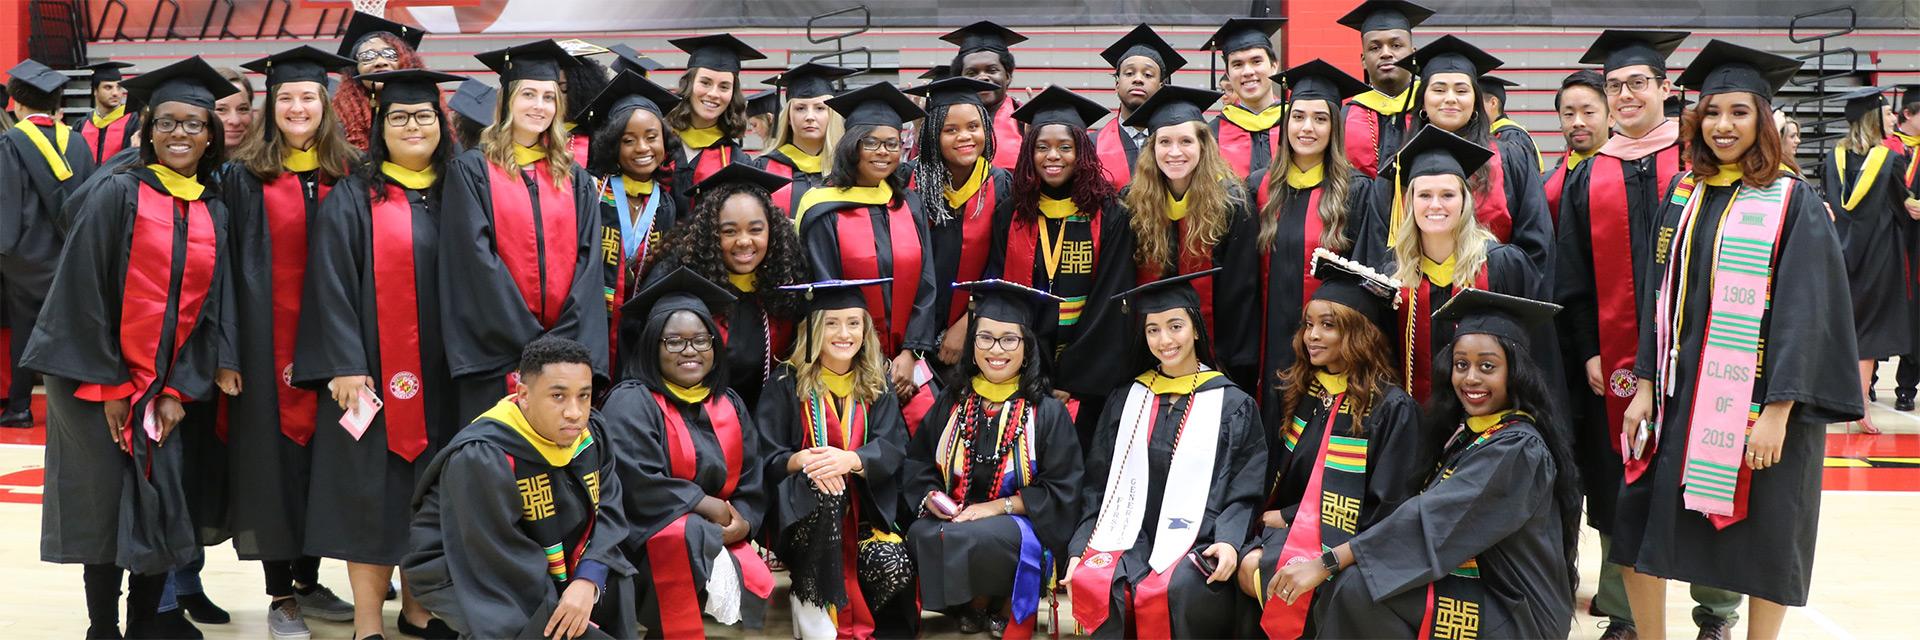 School of Public Health graduates at the SPH Commencement Ceremony at the University of Maryland